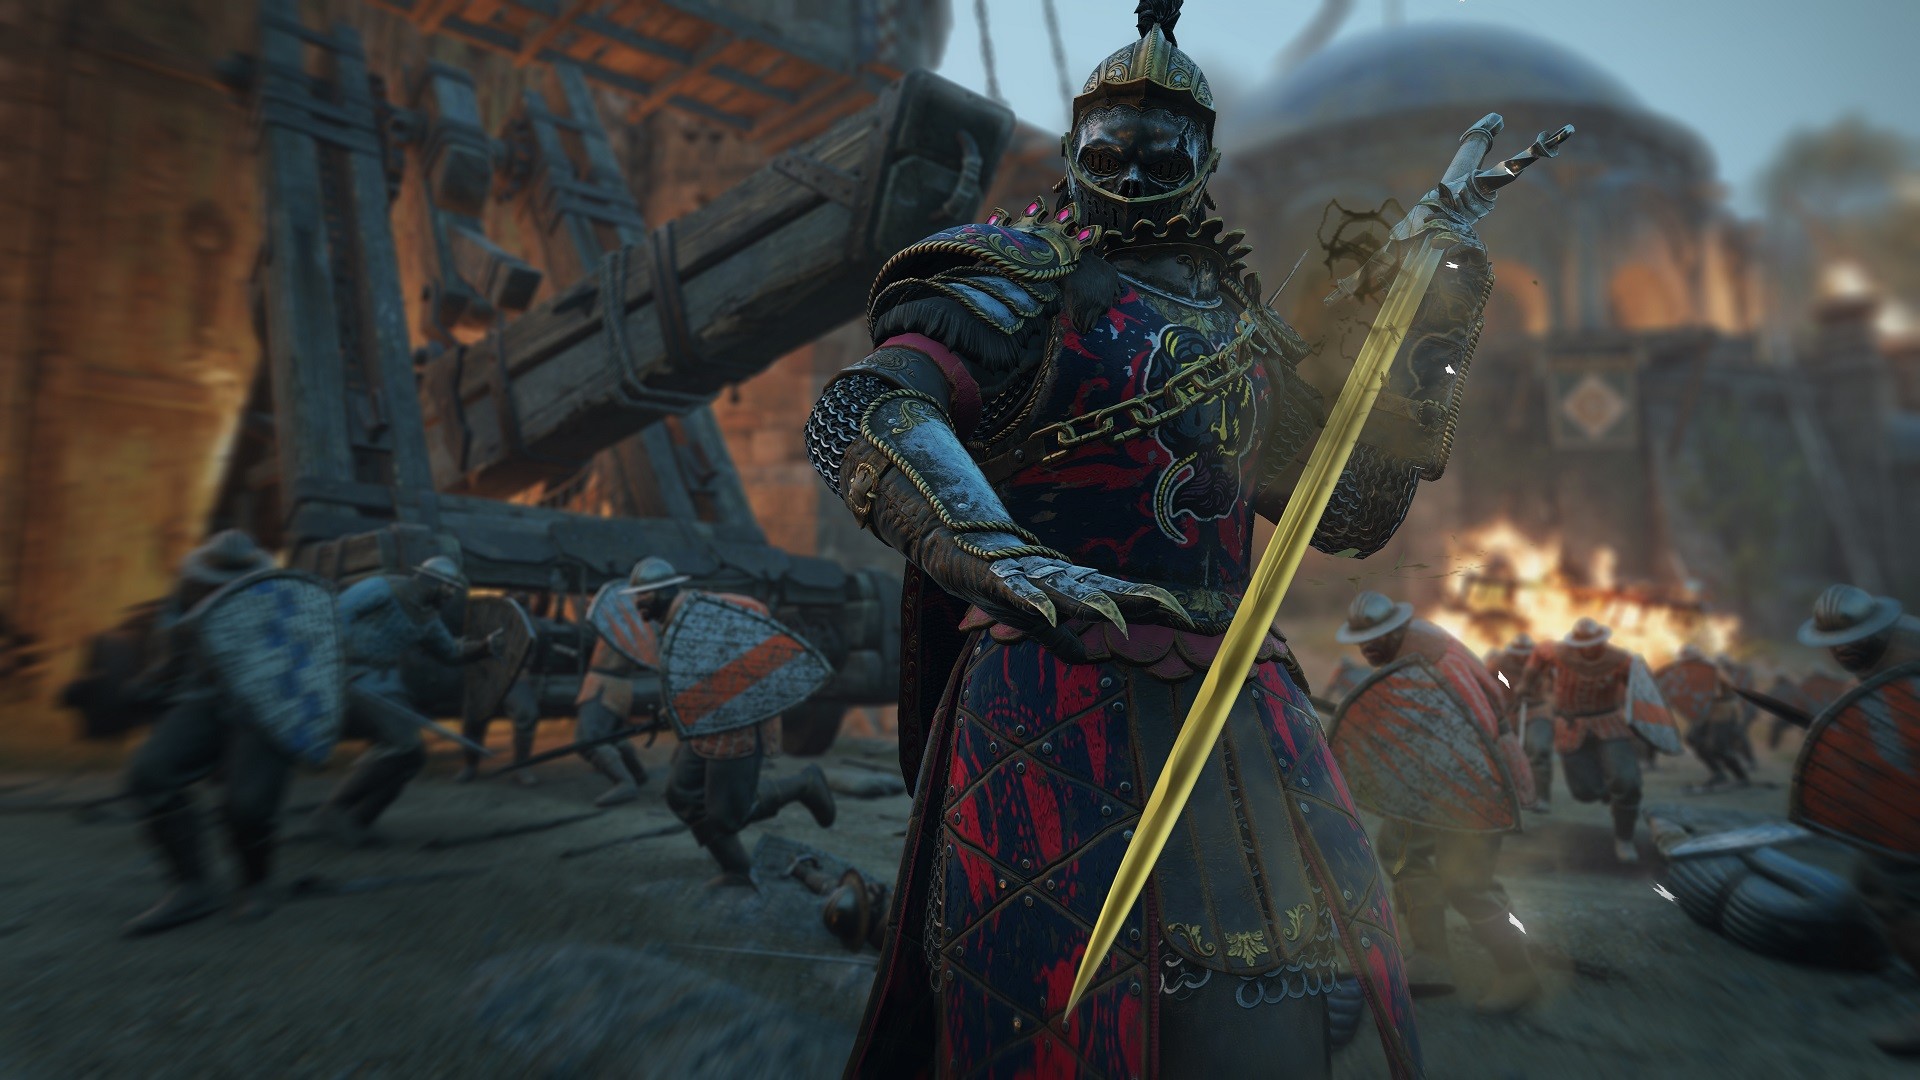 download warmonger for honor